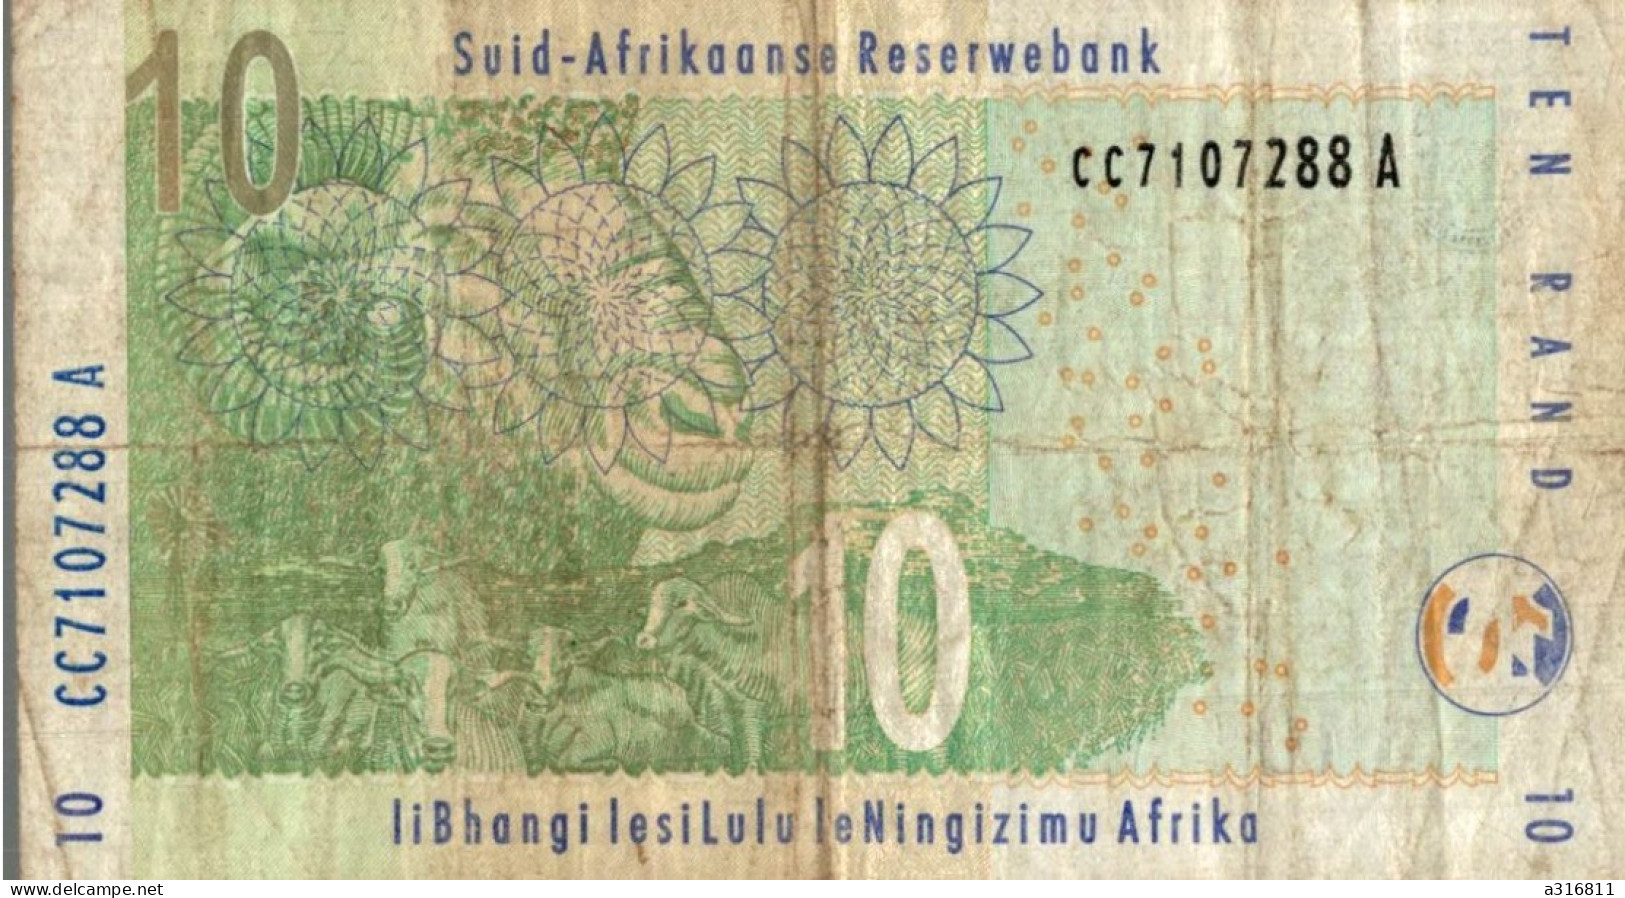 SOUTH AFRICA - SOUTH AFRICAN RESERVE BANK - Sudafrica